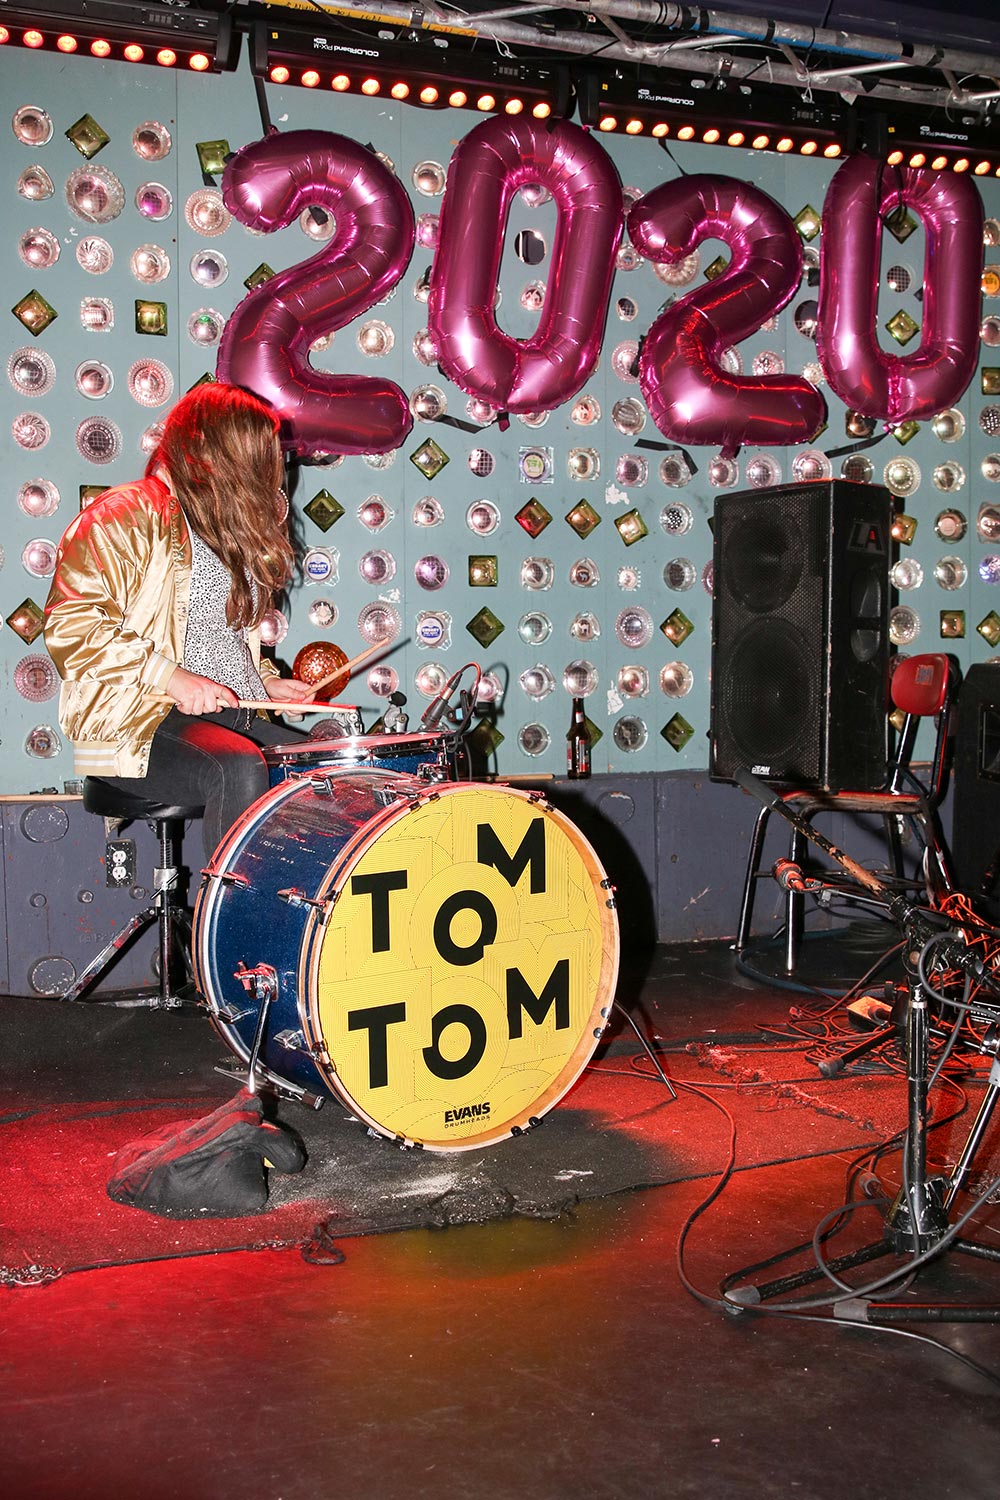 tomtom, female, drummers, magazine, beatmakers, producers, brooklyn, new york city, punk, metal, synth, feminism, music, showcase